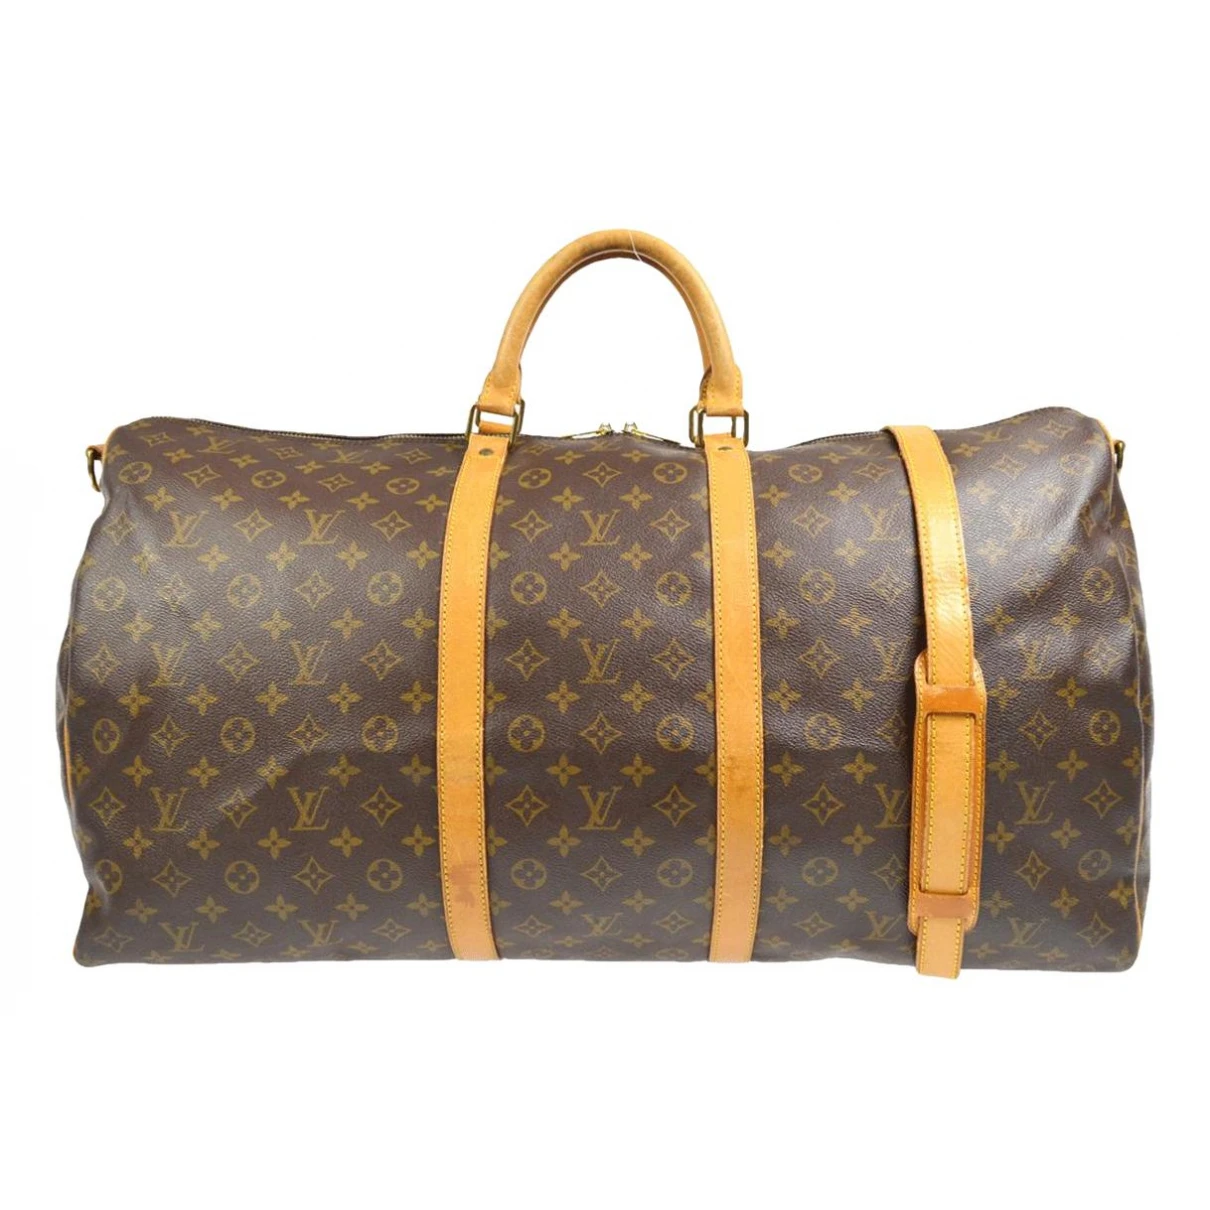 bags Louis Vuitton travel bags Keepall for Female Leather. Used condition